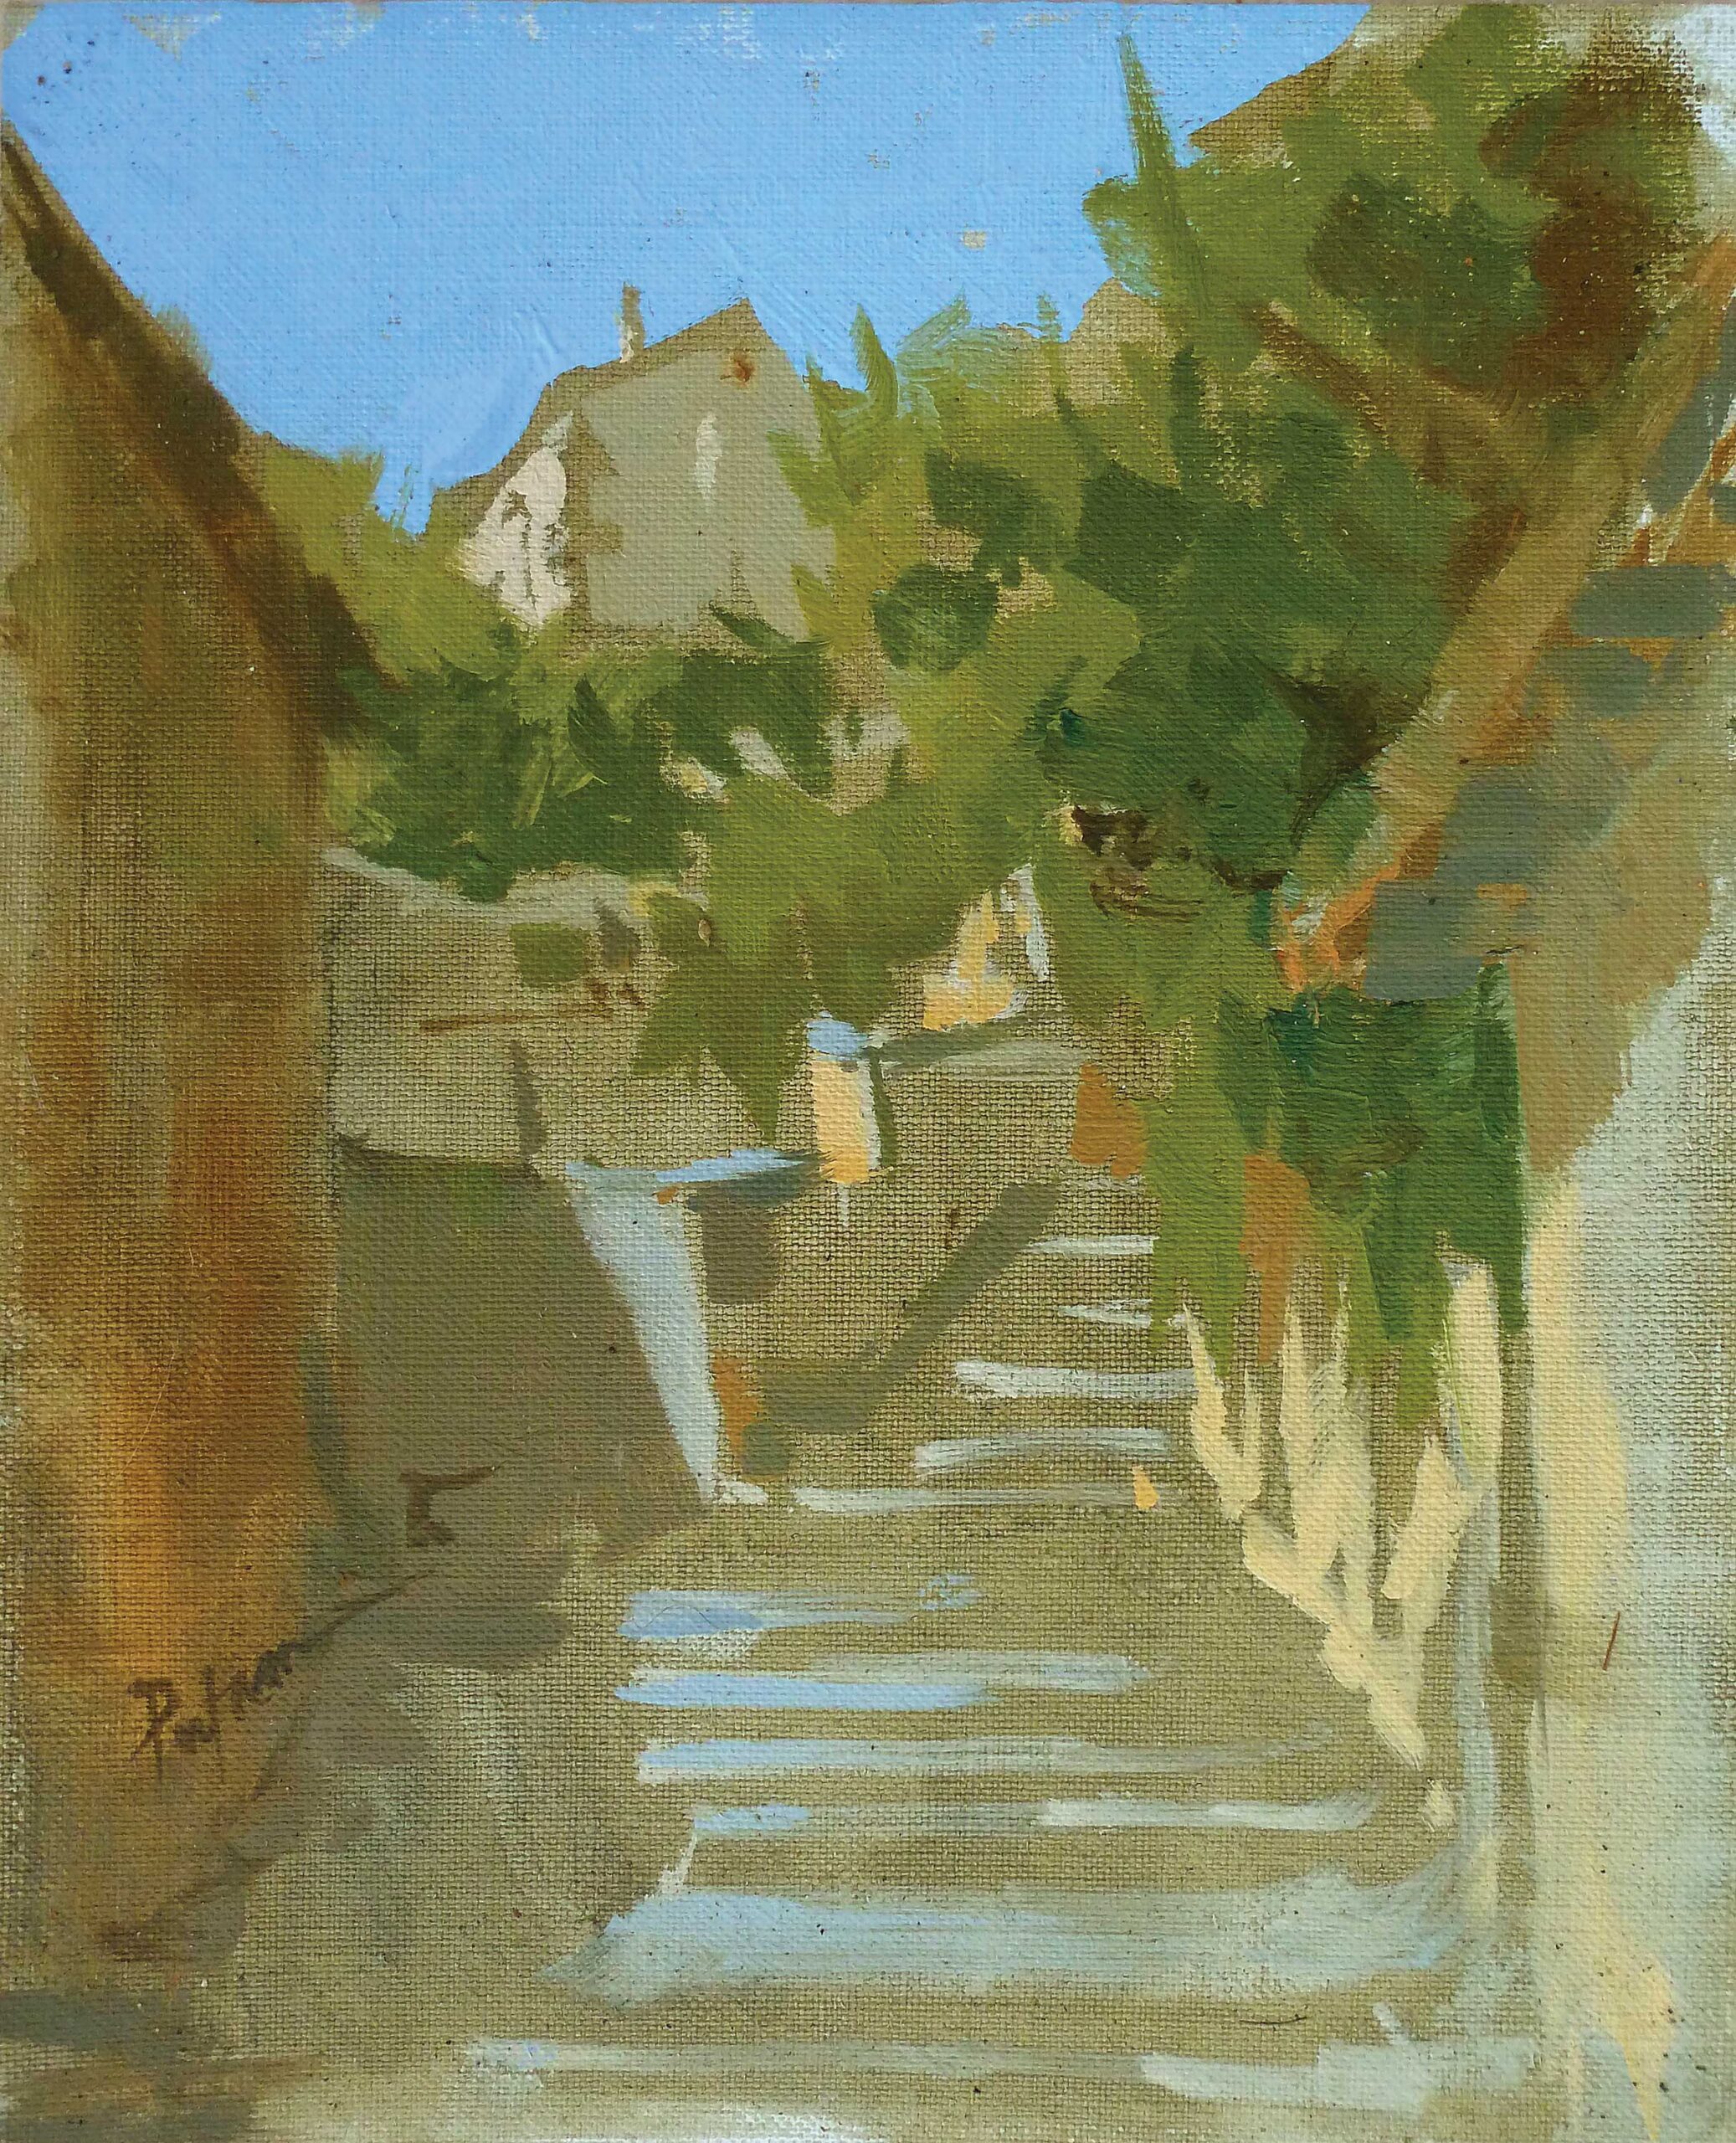 painting en plein air - Lori Putnam, "One Way to Get There," 2015, oil, 12 x 9 in., private collection, plein air, Avignon, France